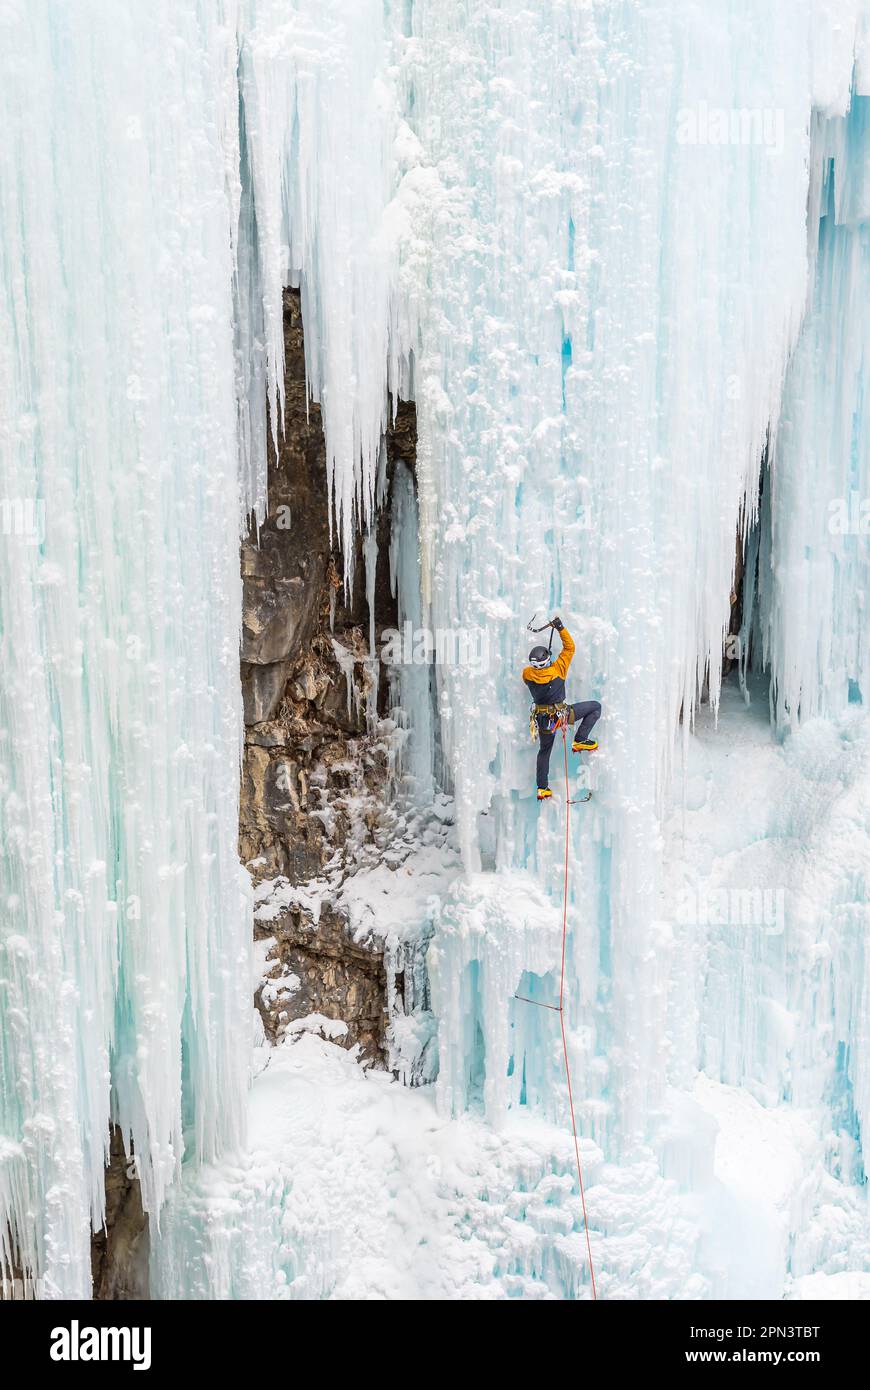 Doug Hollinger climbing a route in Johnston Canyon in Canada Stock Photo